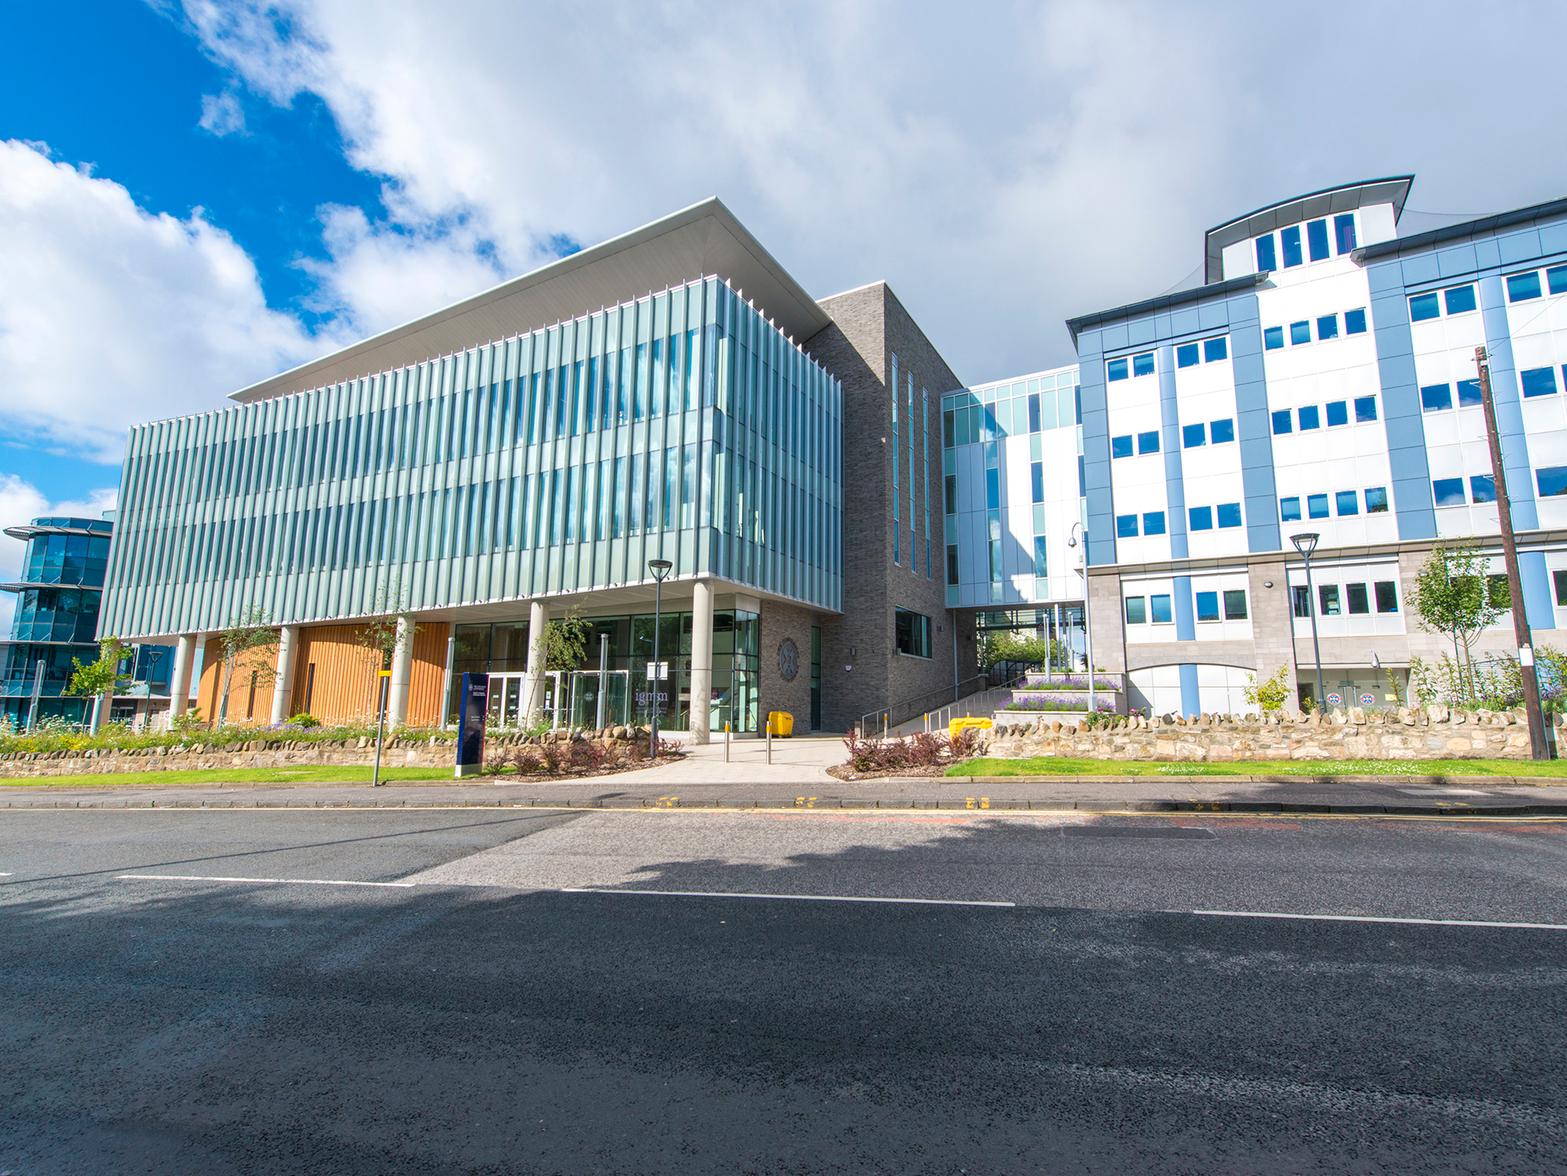 This centre links three University of Edinburgh units: The CRUK Edinburgh Cancer Centre, the MRC Human Genetics Unit, and the Centre for Genomic and Experimental Medicine. The event will include talks, poster presentations and tours. 

Western General Hospital Campus, Crewe Road, EH4 2XR, open Saturday 10am-5pm.